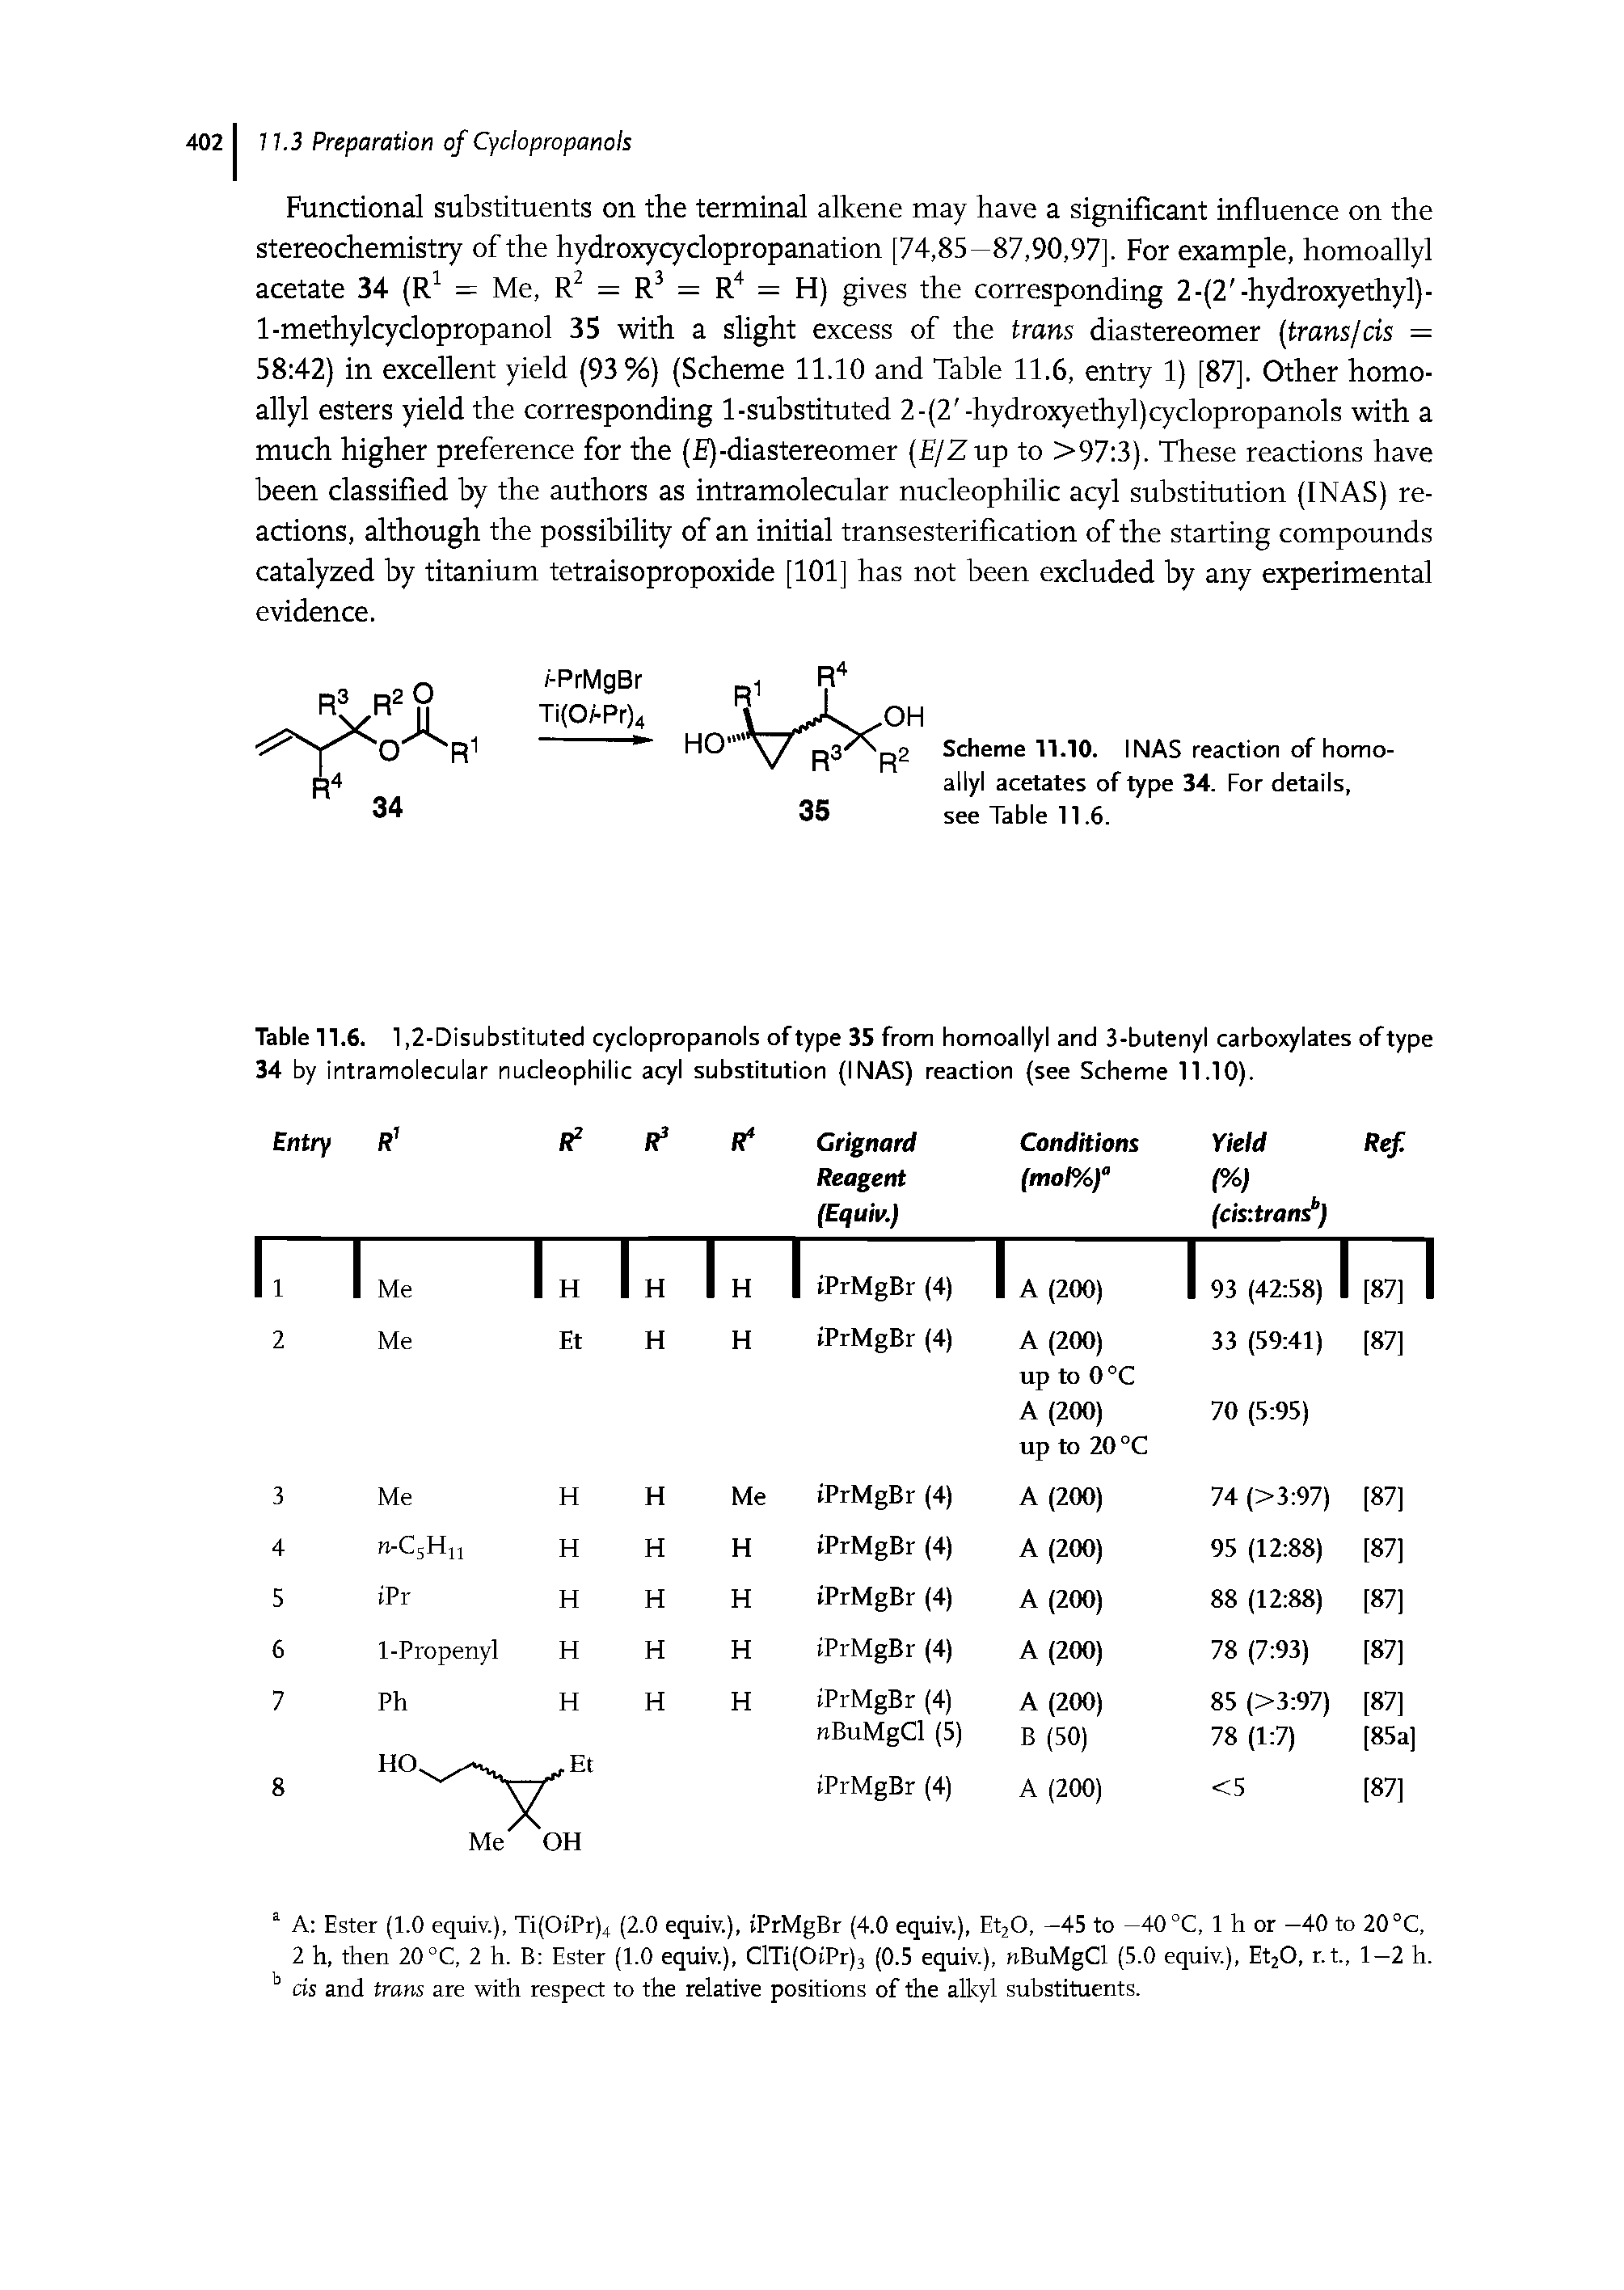 Table 11.6. 1,2-Disubstituted cyclopropanols of type 35 from homoallyl and 3-butenyl carboxylates oftype...